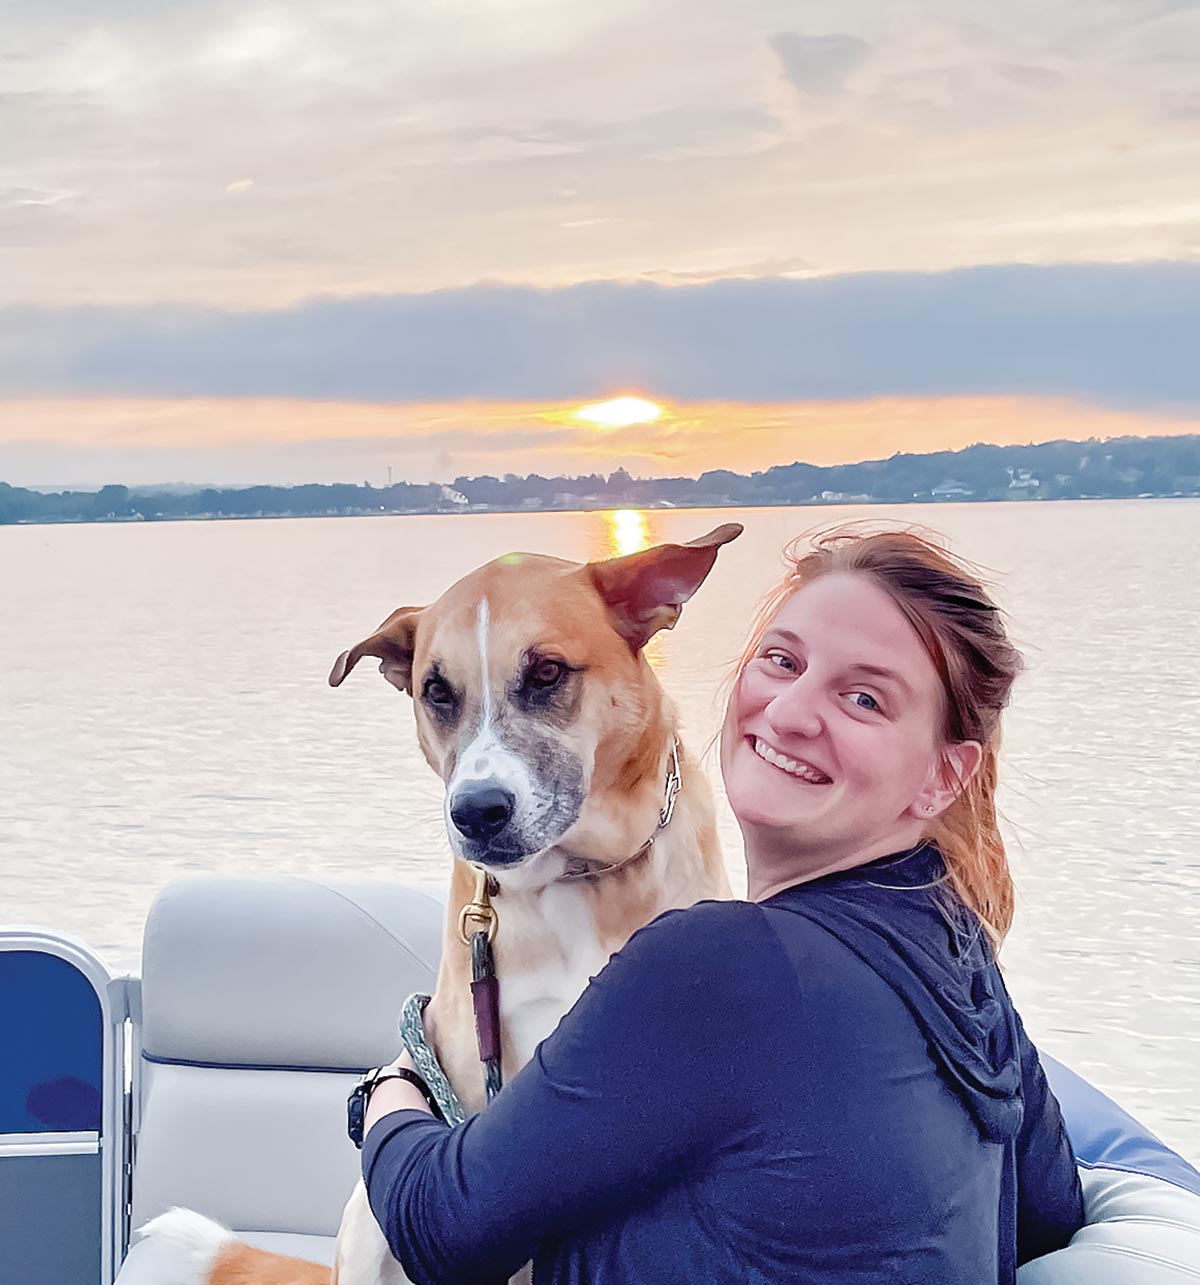 Pokoj Family - girl smiling with her dog on the boat while the sun sets